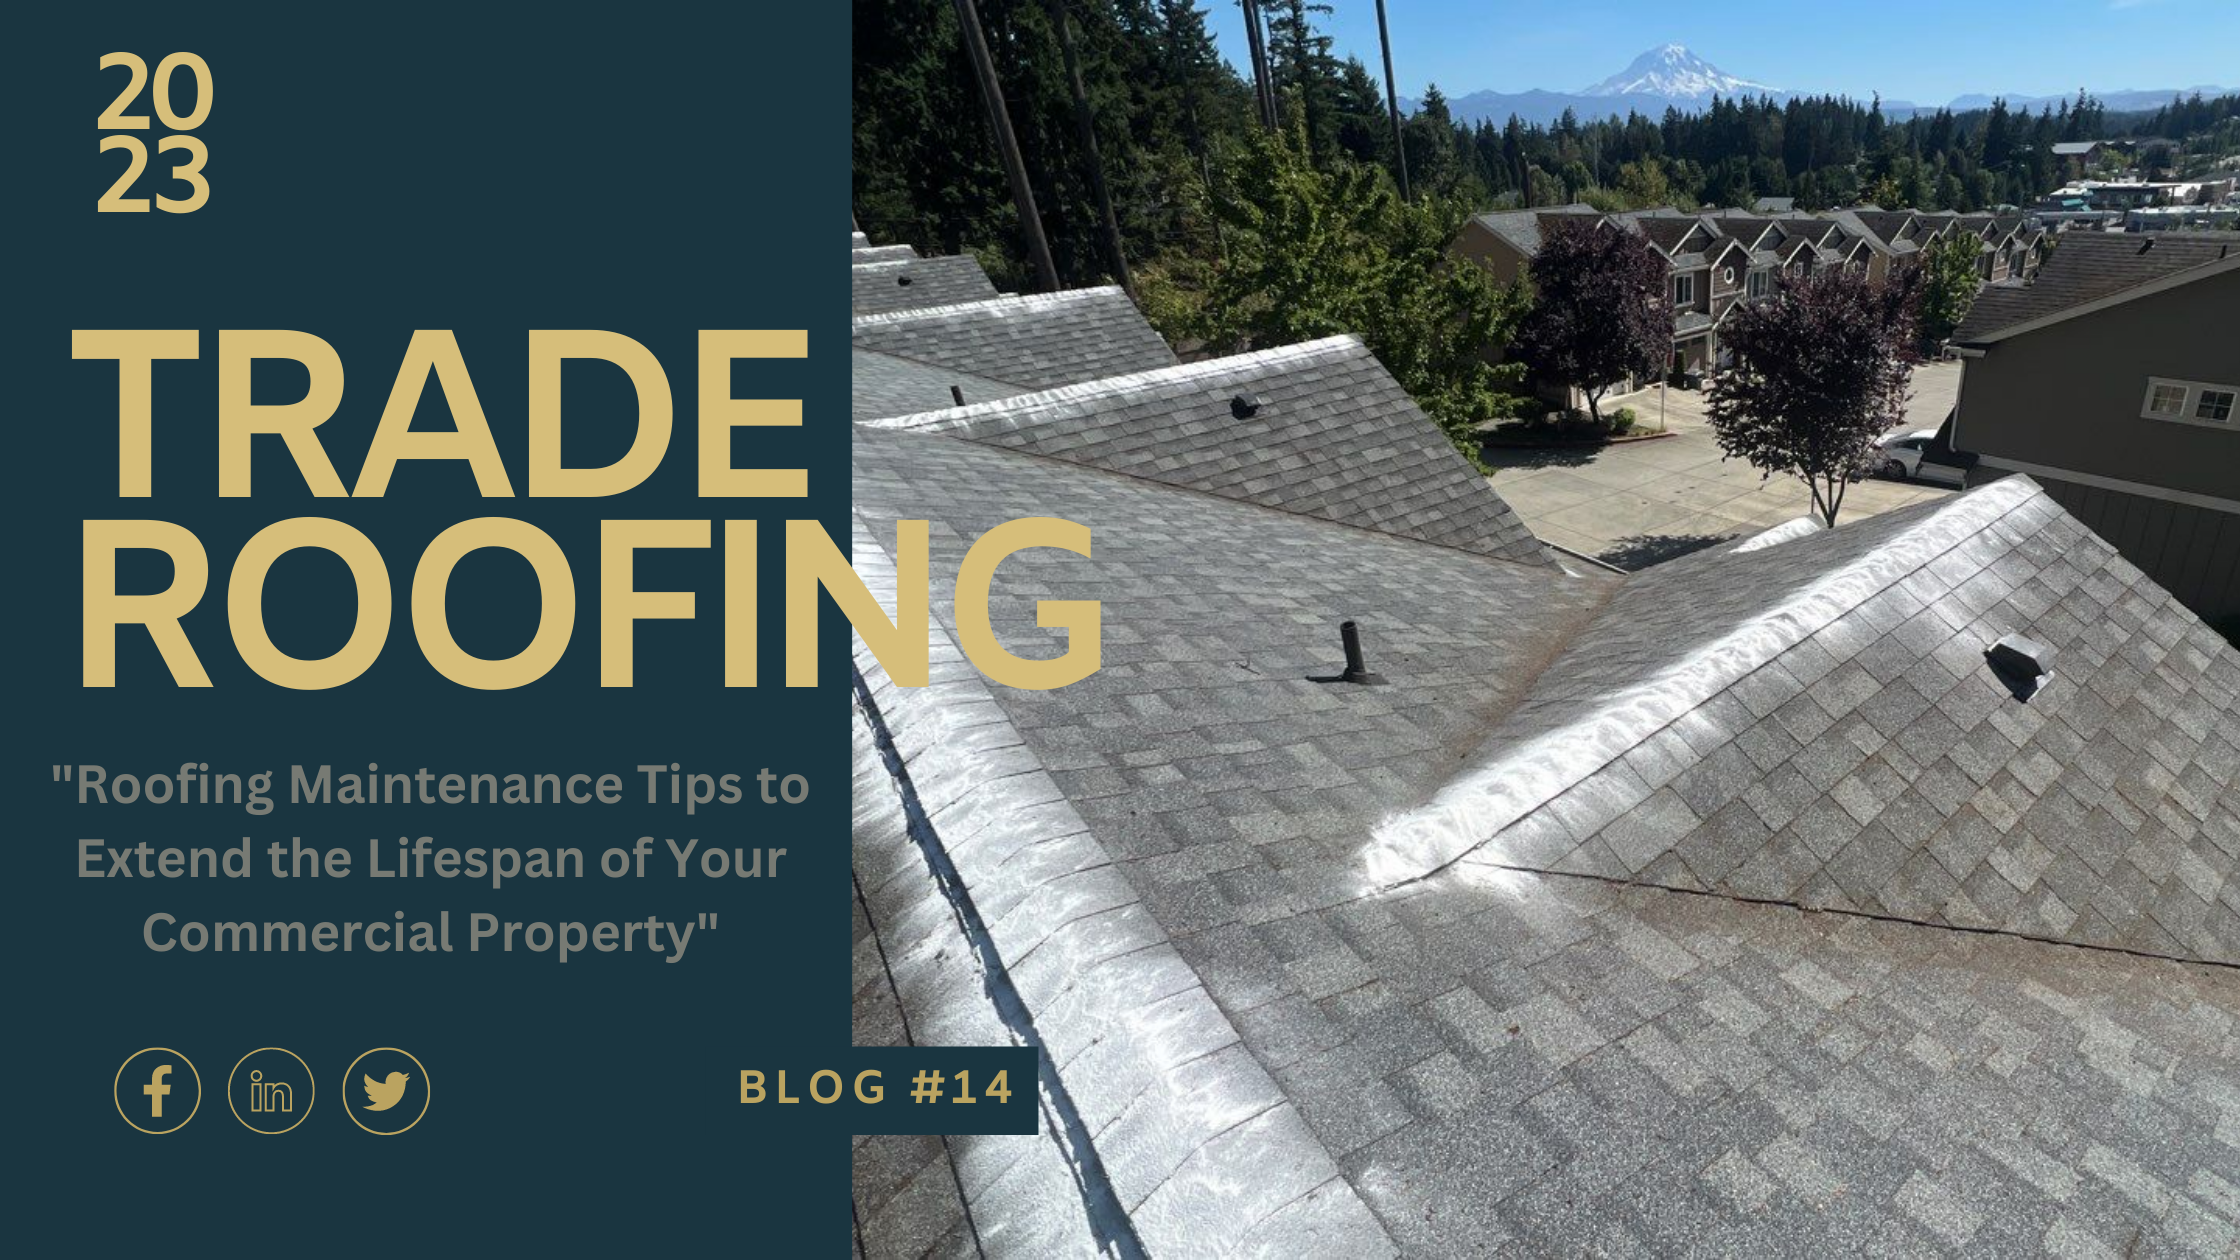 Roofing Maintenance Tips to Extend the Lifespan of Your Commercial Property